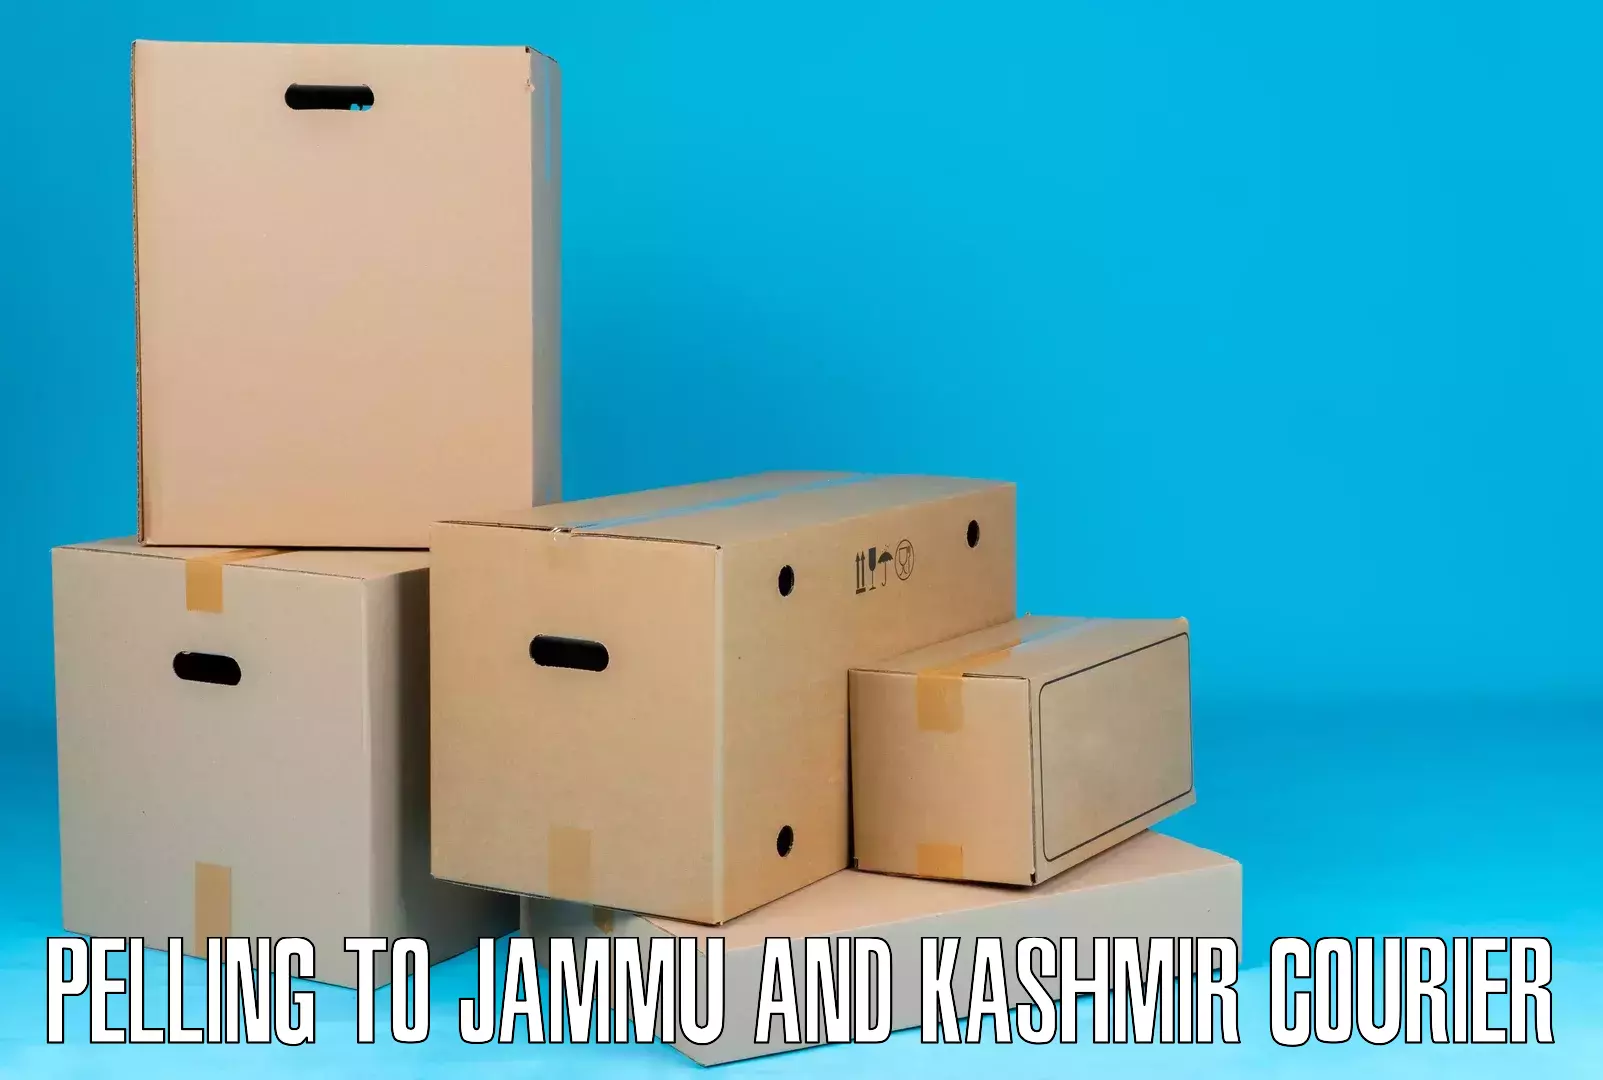 Express package services Pelling to Jammu and Kashmir